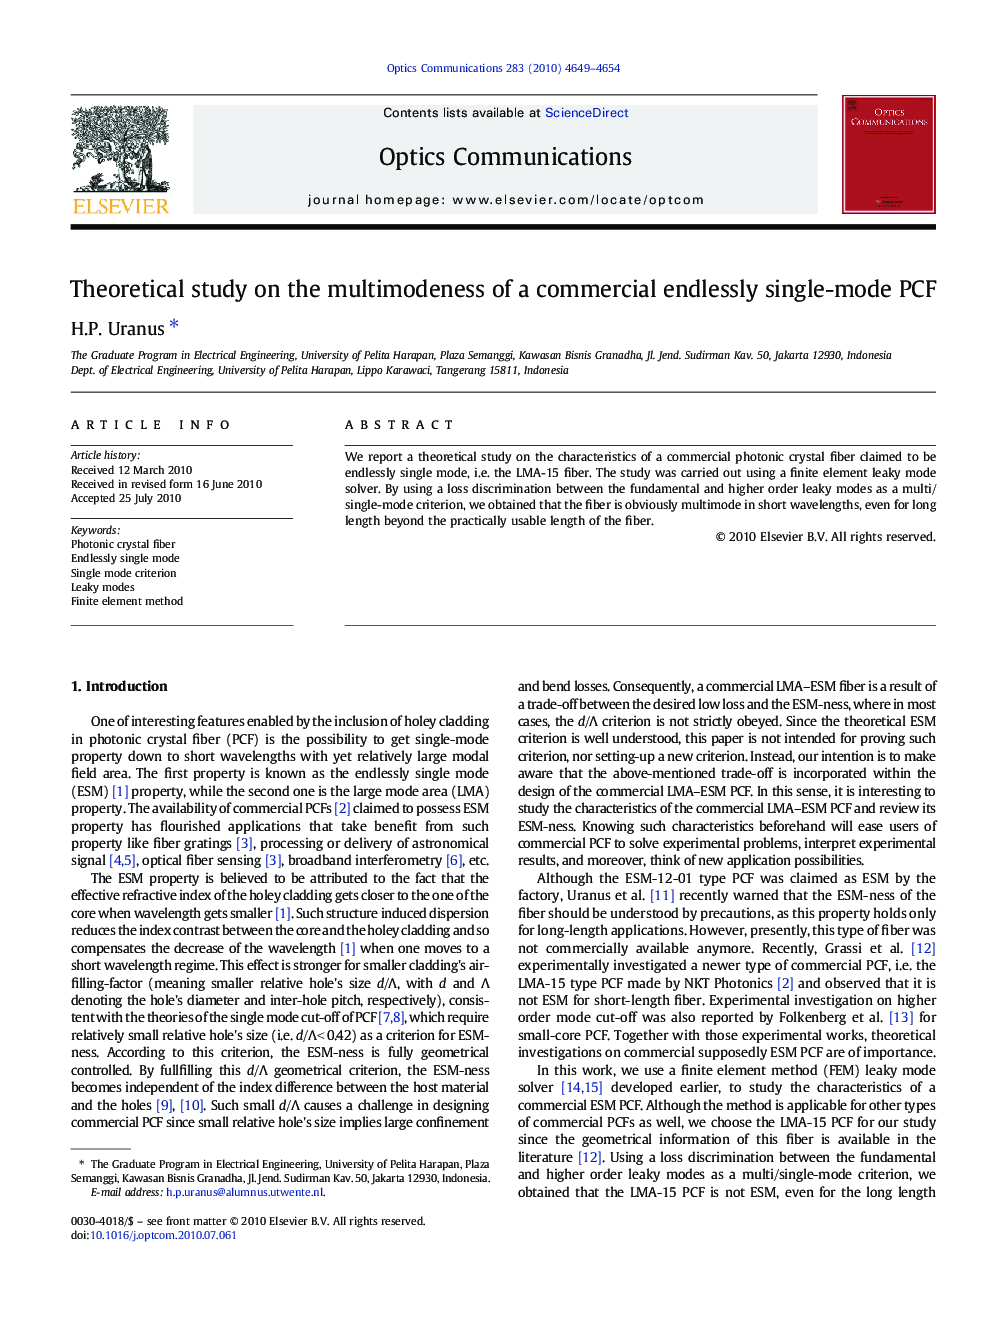 Theoretical study on the multimodeness of a commercial endlessly single-mode PCF